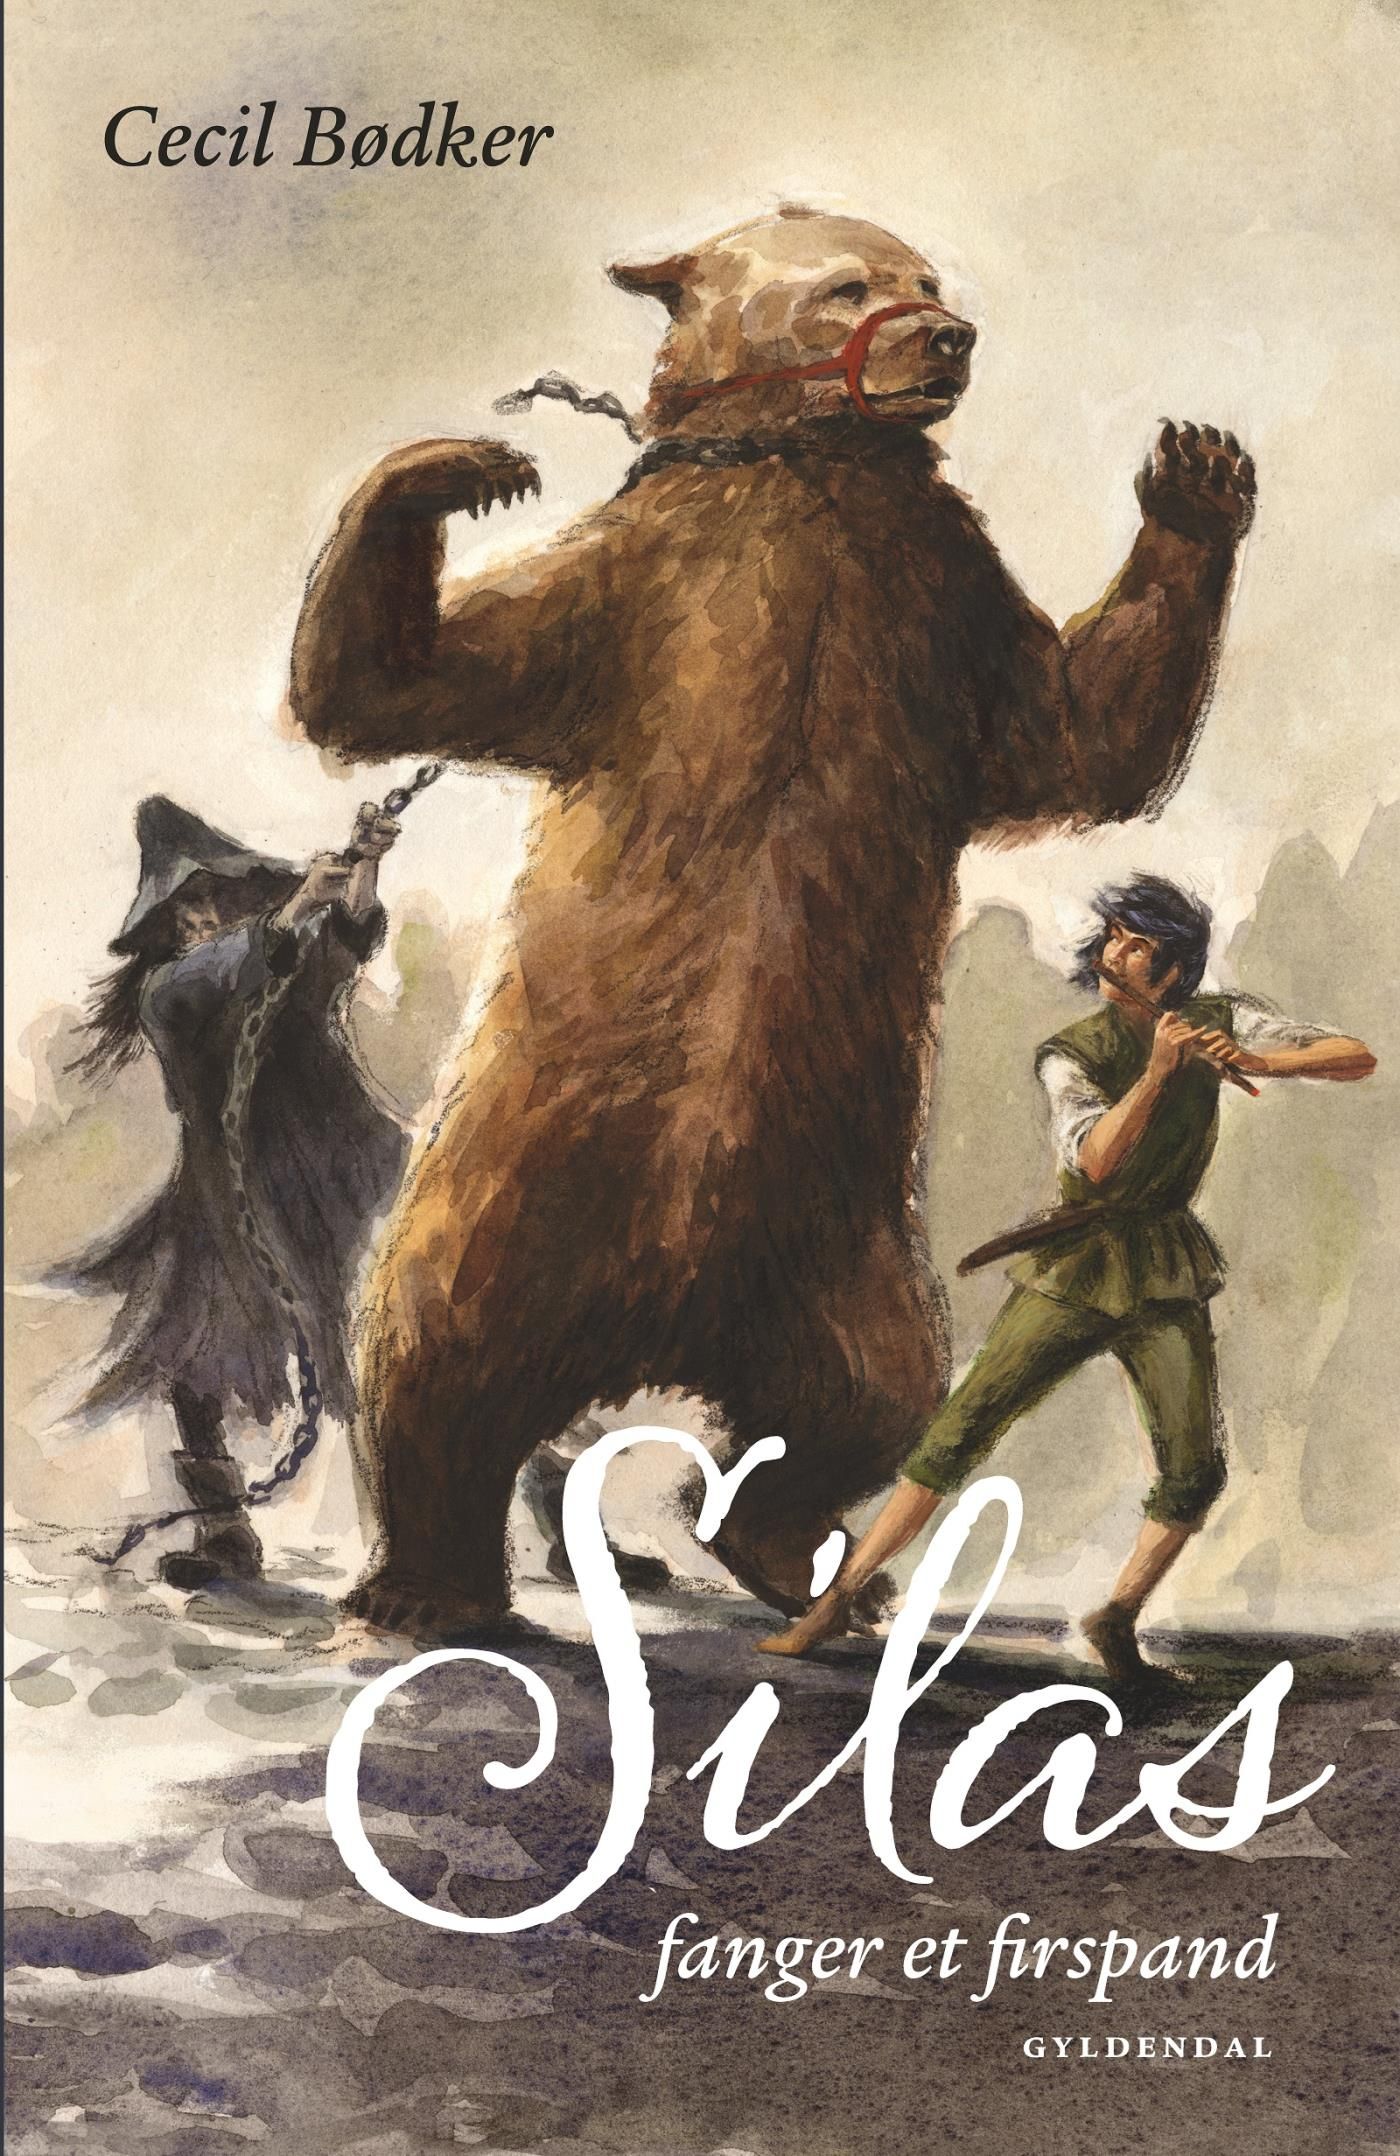 Silas 3 - Silas fanger et firspand, eBook by Cecil Bødker